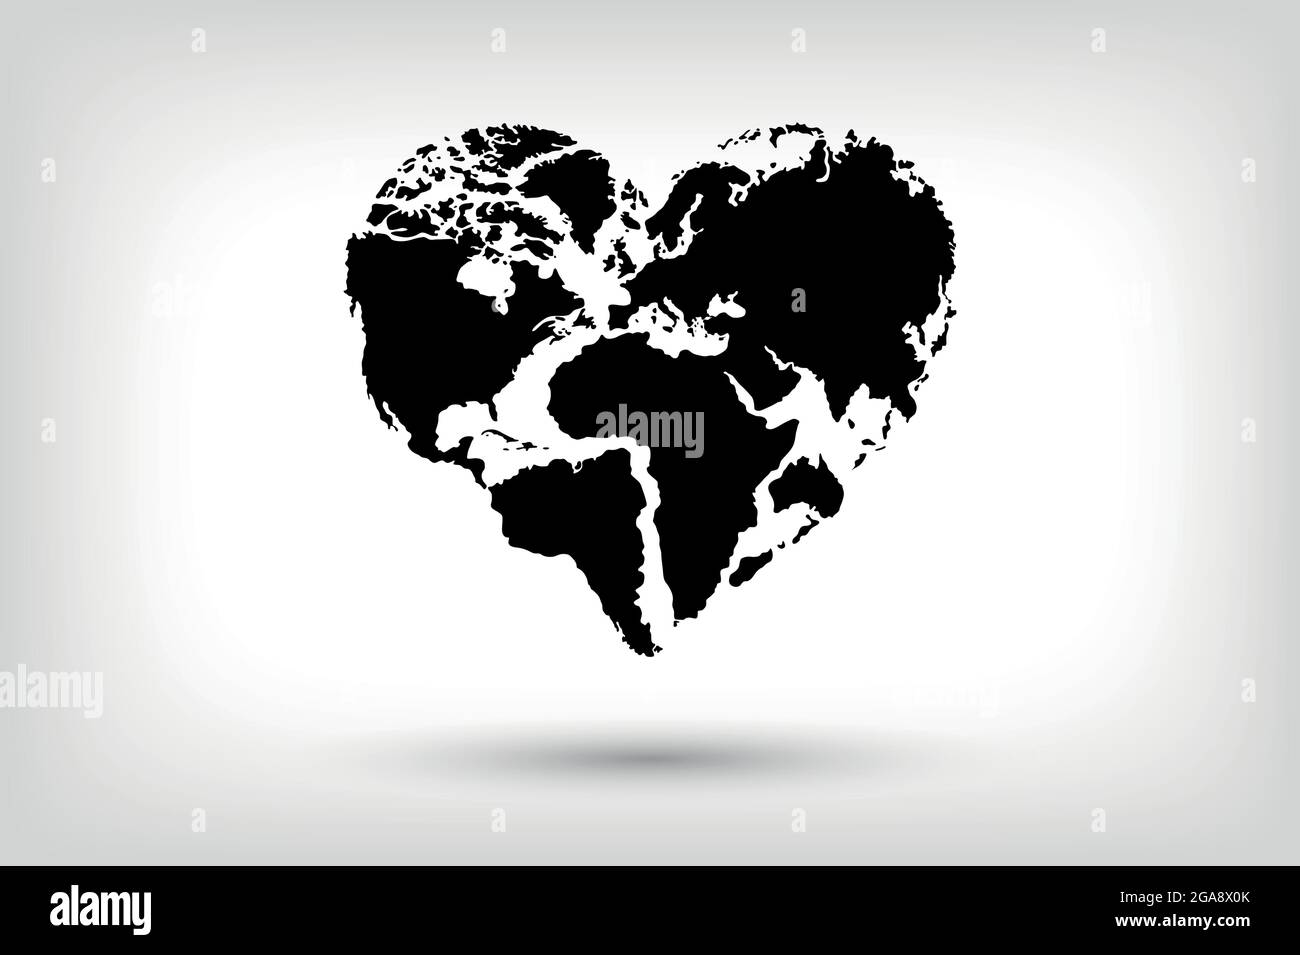 Heart World, World and Love, Happy World Map. World map design that looks like a heart. World map representing love and peace on Earth. Stock Vector